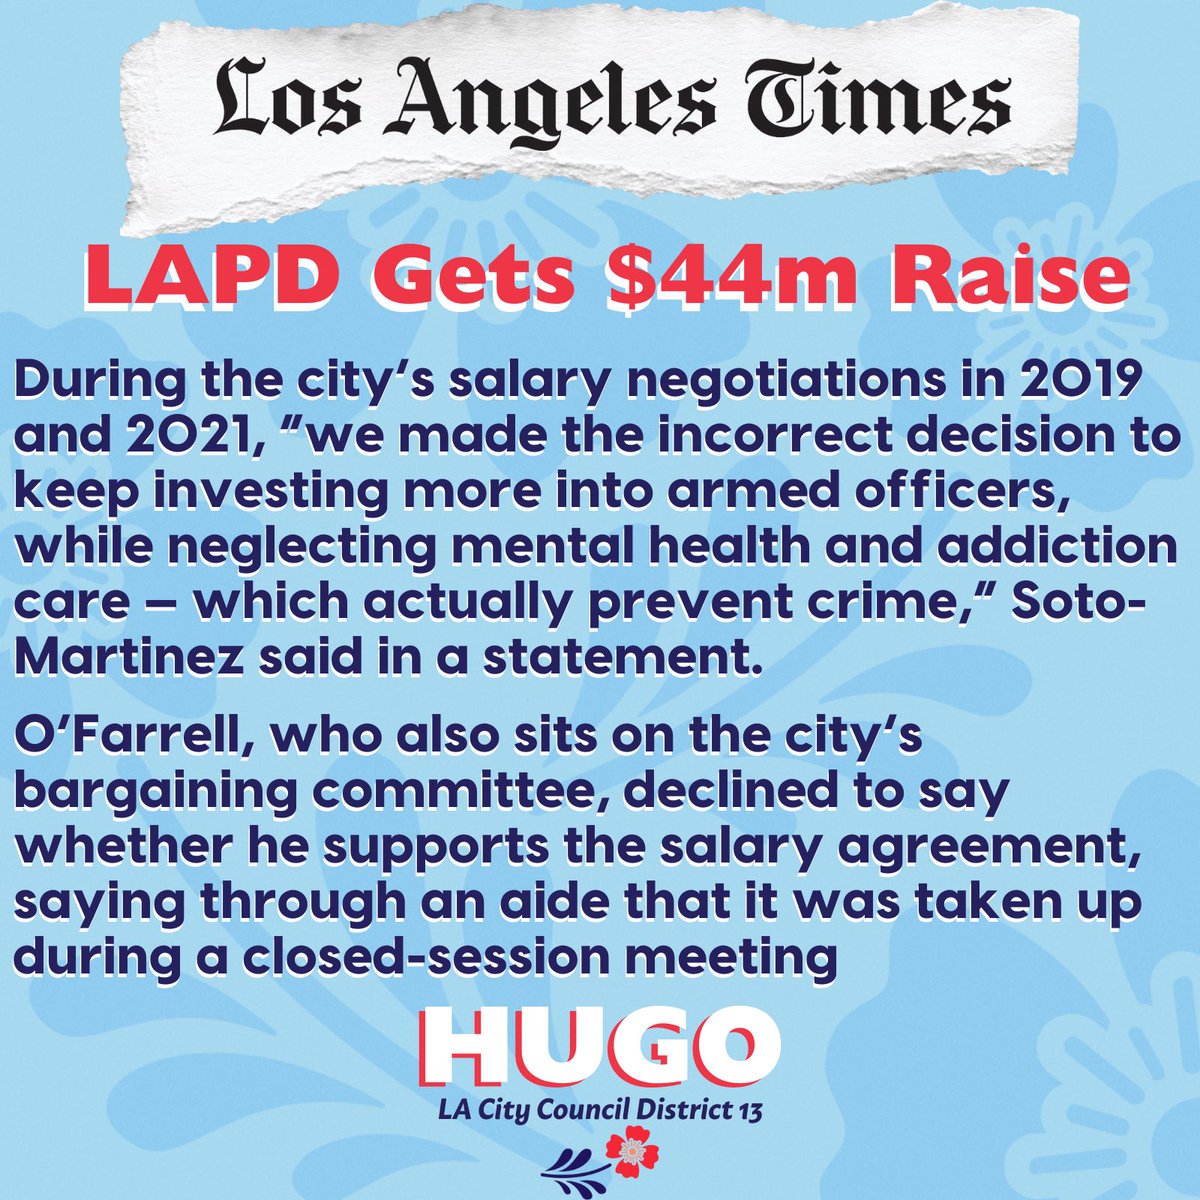 My opponent is beholden to the police union, the largest lobbying group in the city. As a result, they have 45% of our City budget. This comes at a cost — it's why we don't have mental health or addiction services, speed bumps, or bike lanes. It's why our city's broken.